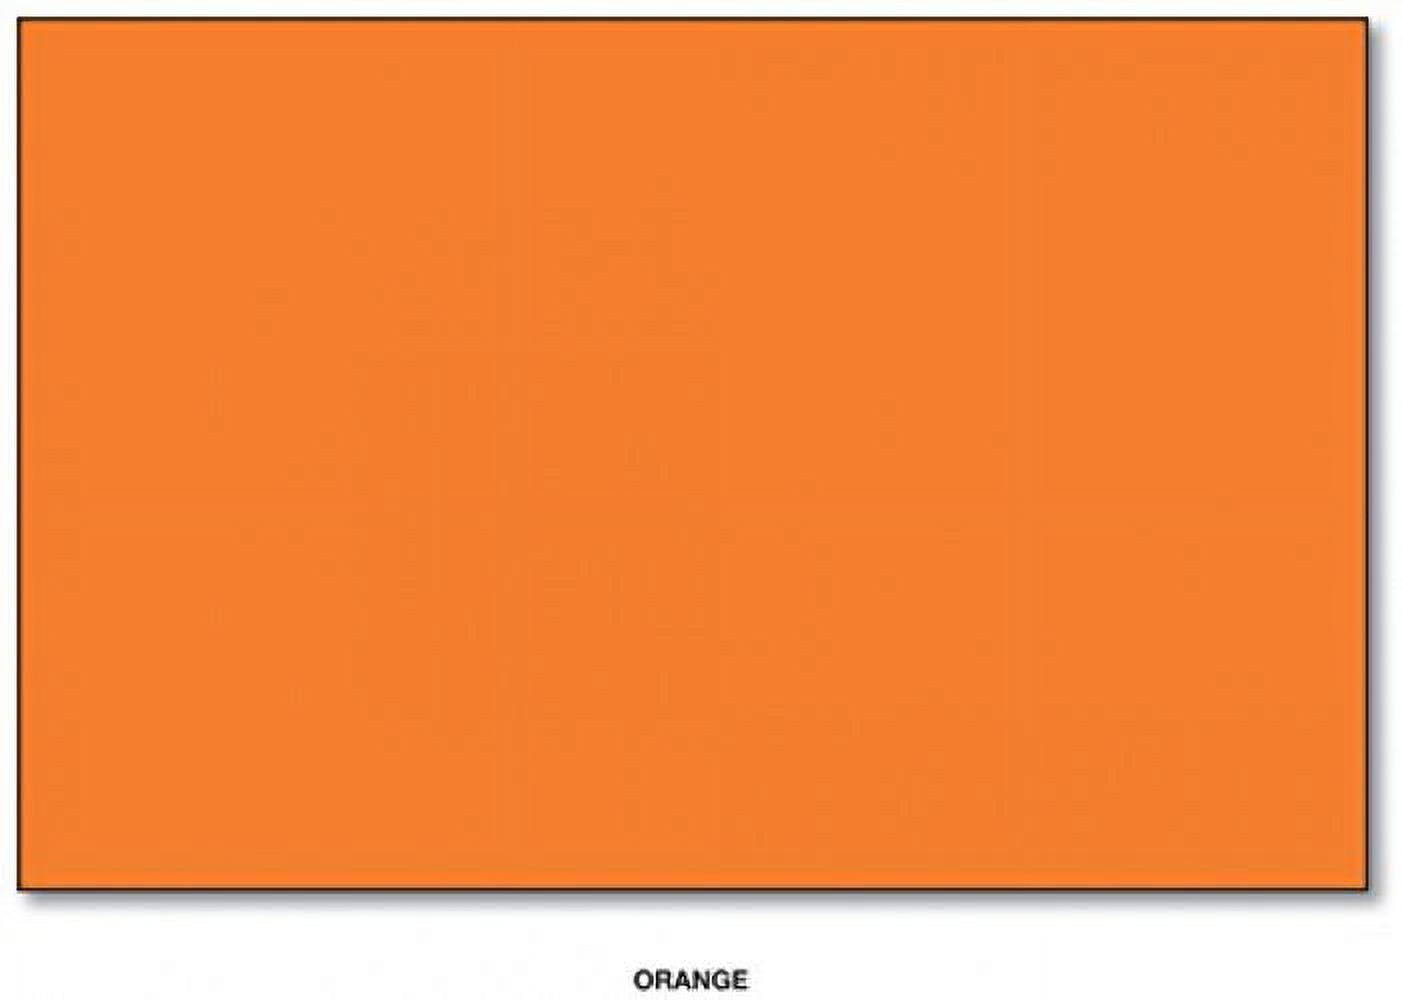 11 x 17 Orange Color Paper Smooth, for School, Office & Home Supplies,  Holiday Crafting, Arts & Crafts, Acid & Lignin Free